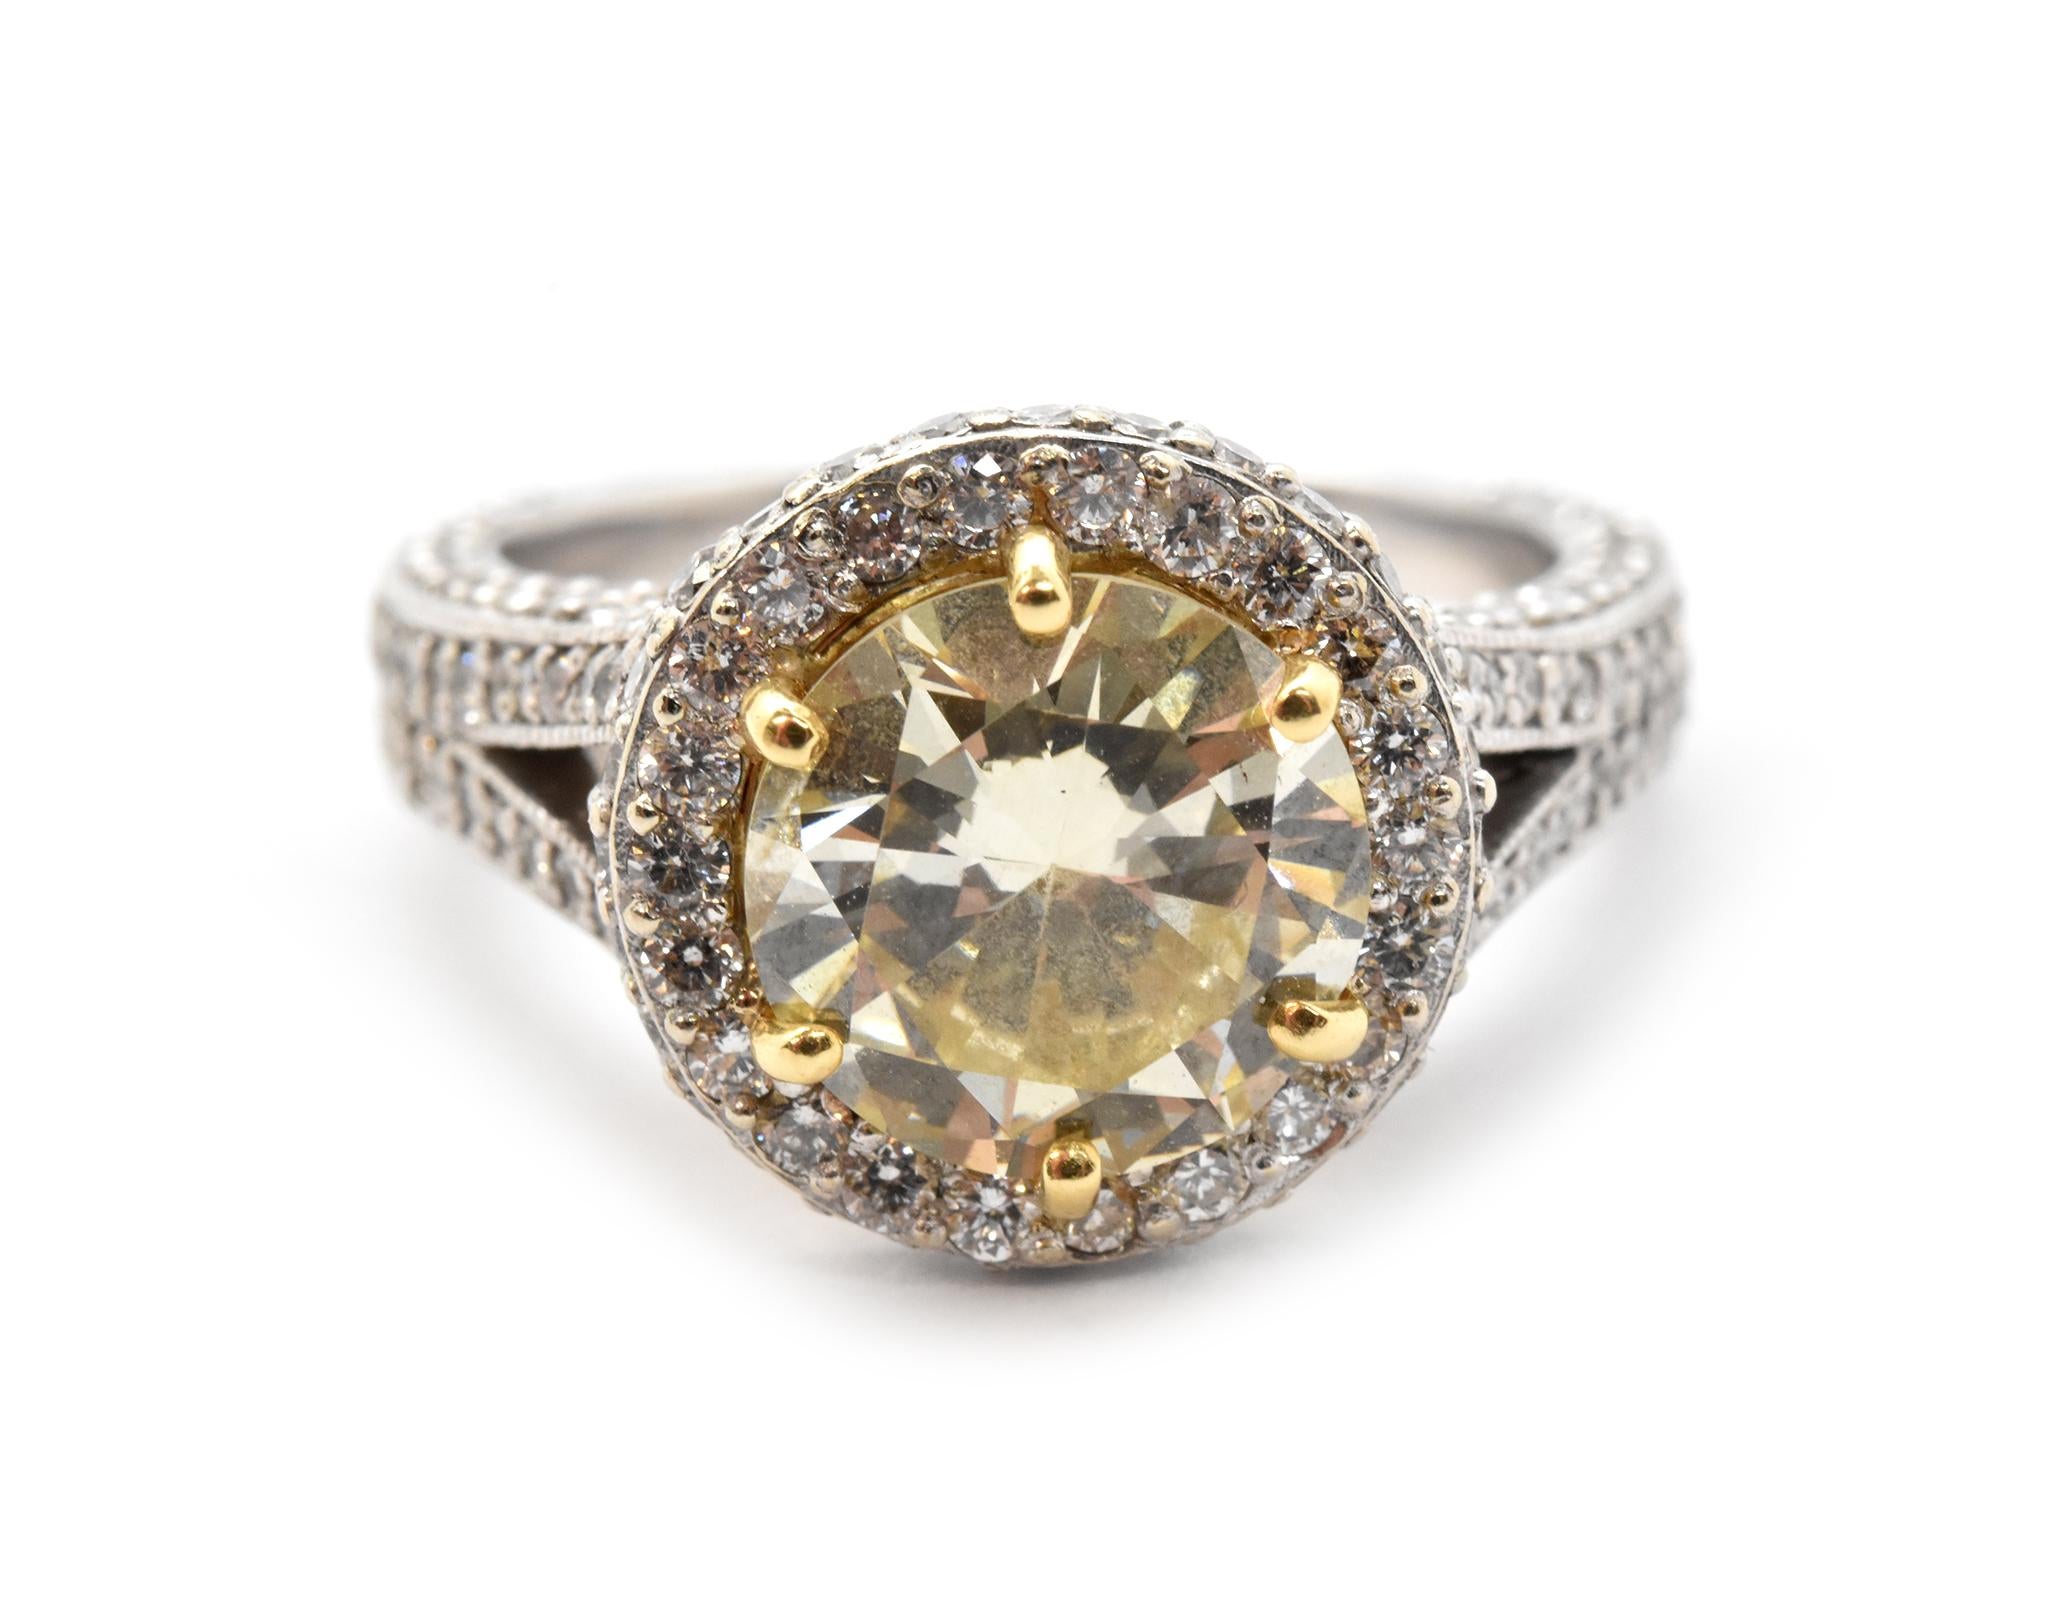 Shown in the picture is a jaw-dropping engagement ring designed with both 18k white and yellow gold, set into the mounting is a round brilliant 2.84ct fancy yellow diamond with a clarity of SI2. The mounting on the ring splits off on the shoulder,